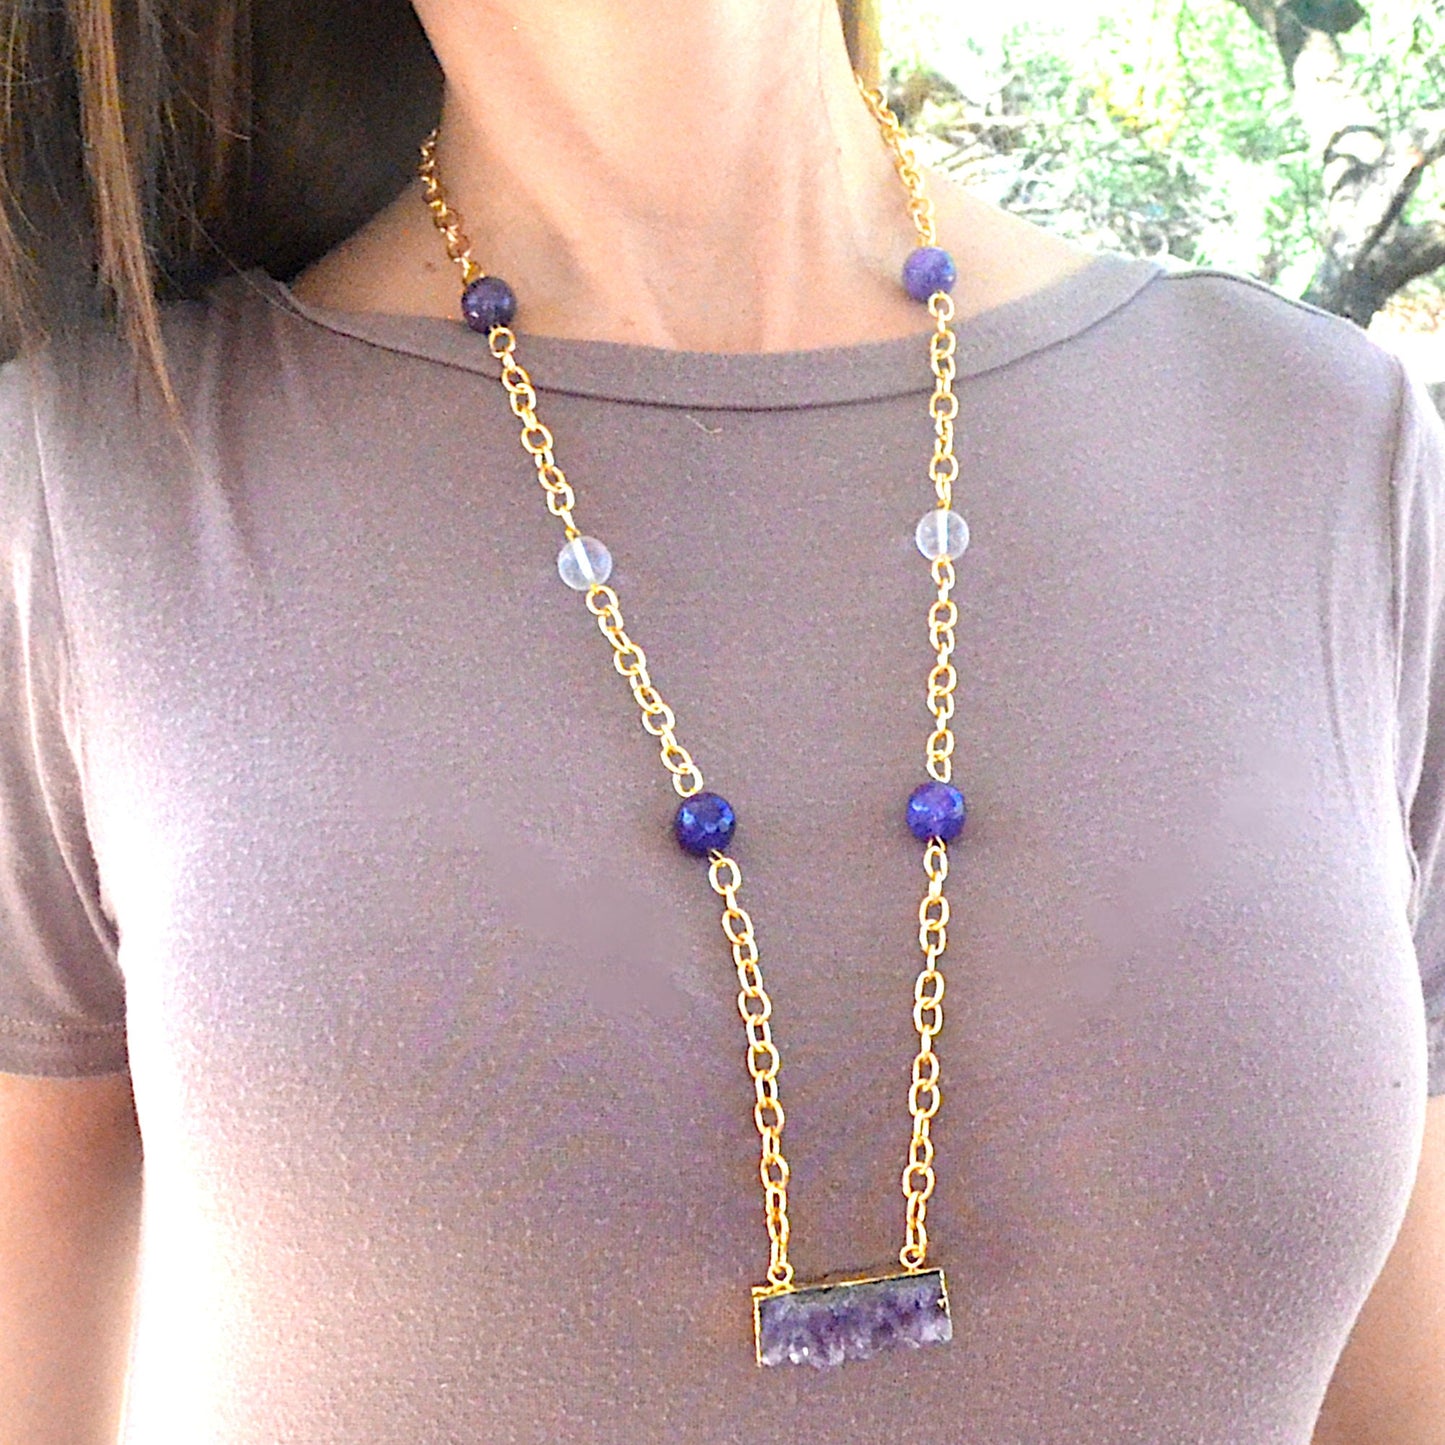 SALE Amethyst Couture Gemstone Beaded Bar Necklace